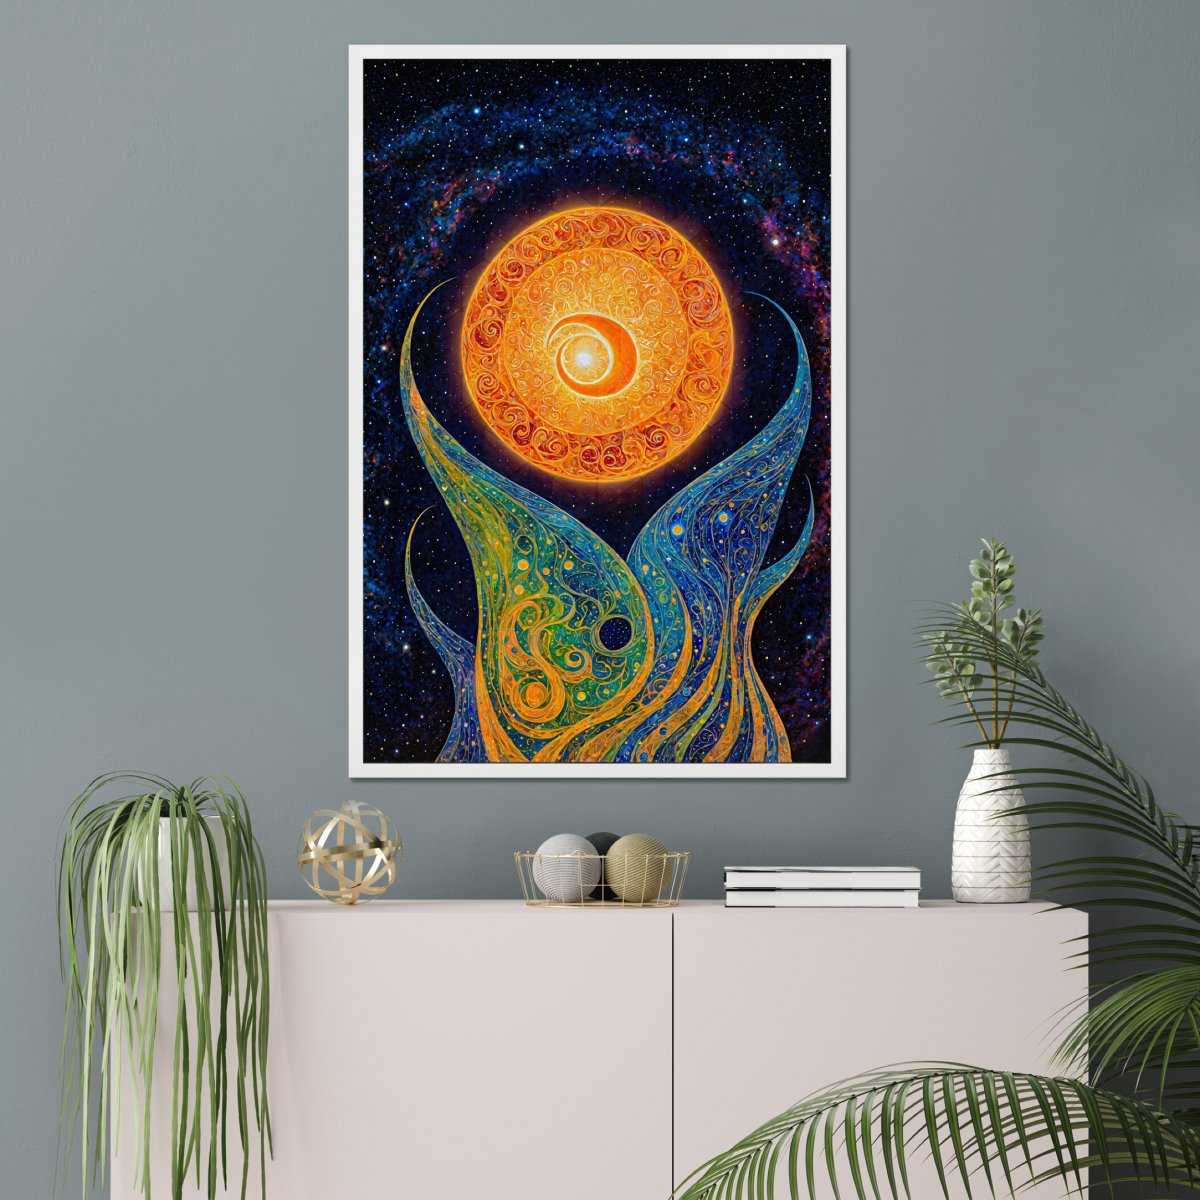 Sunny patterns - Art print - Poster - Ever colorful